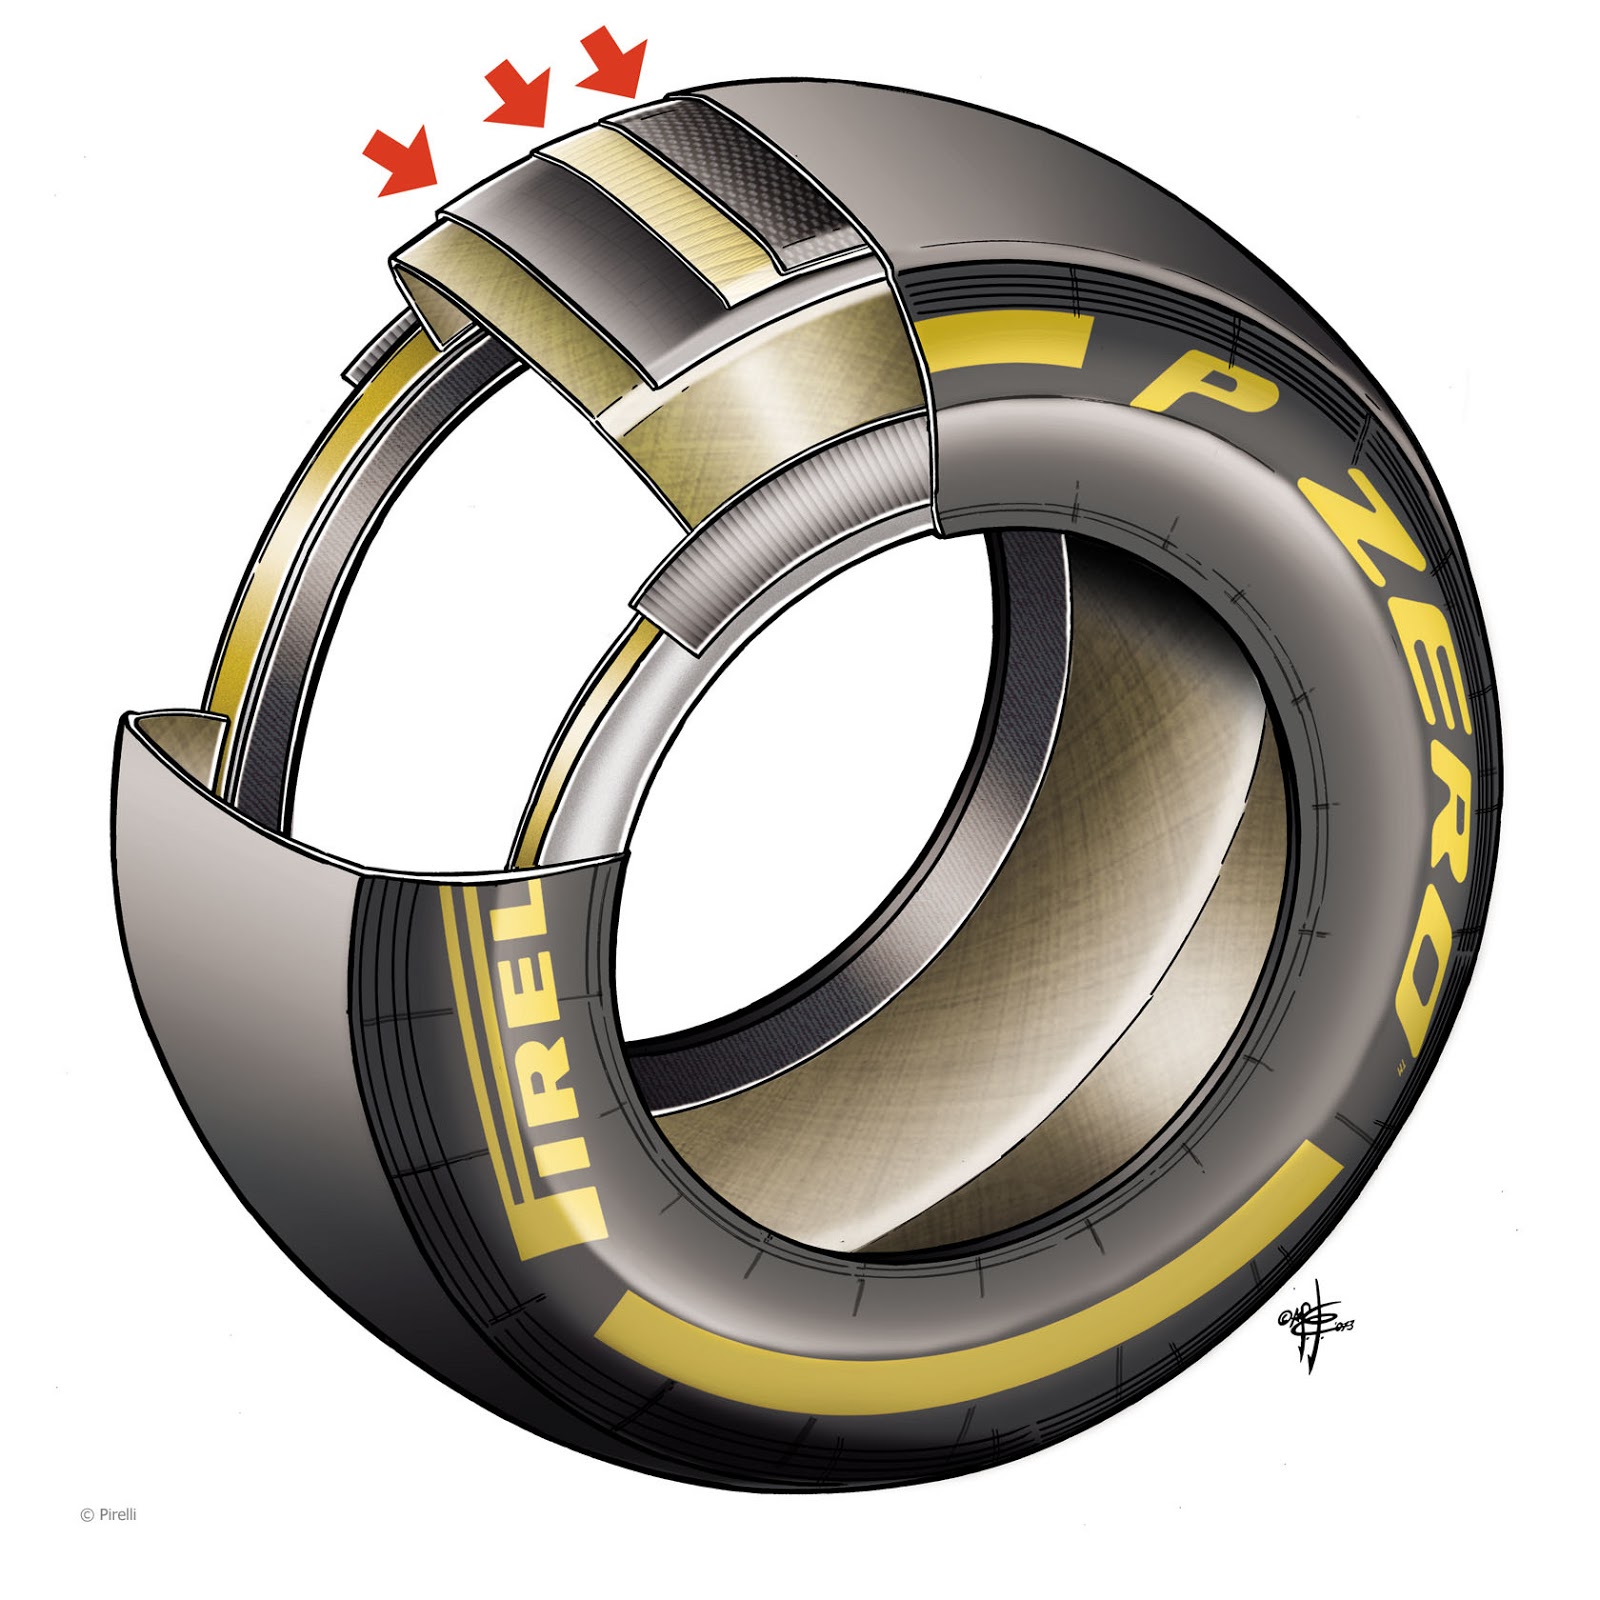 axis-of-oversteer-testgate-no-new-pirelli-tires-in-canada